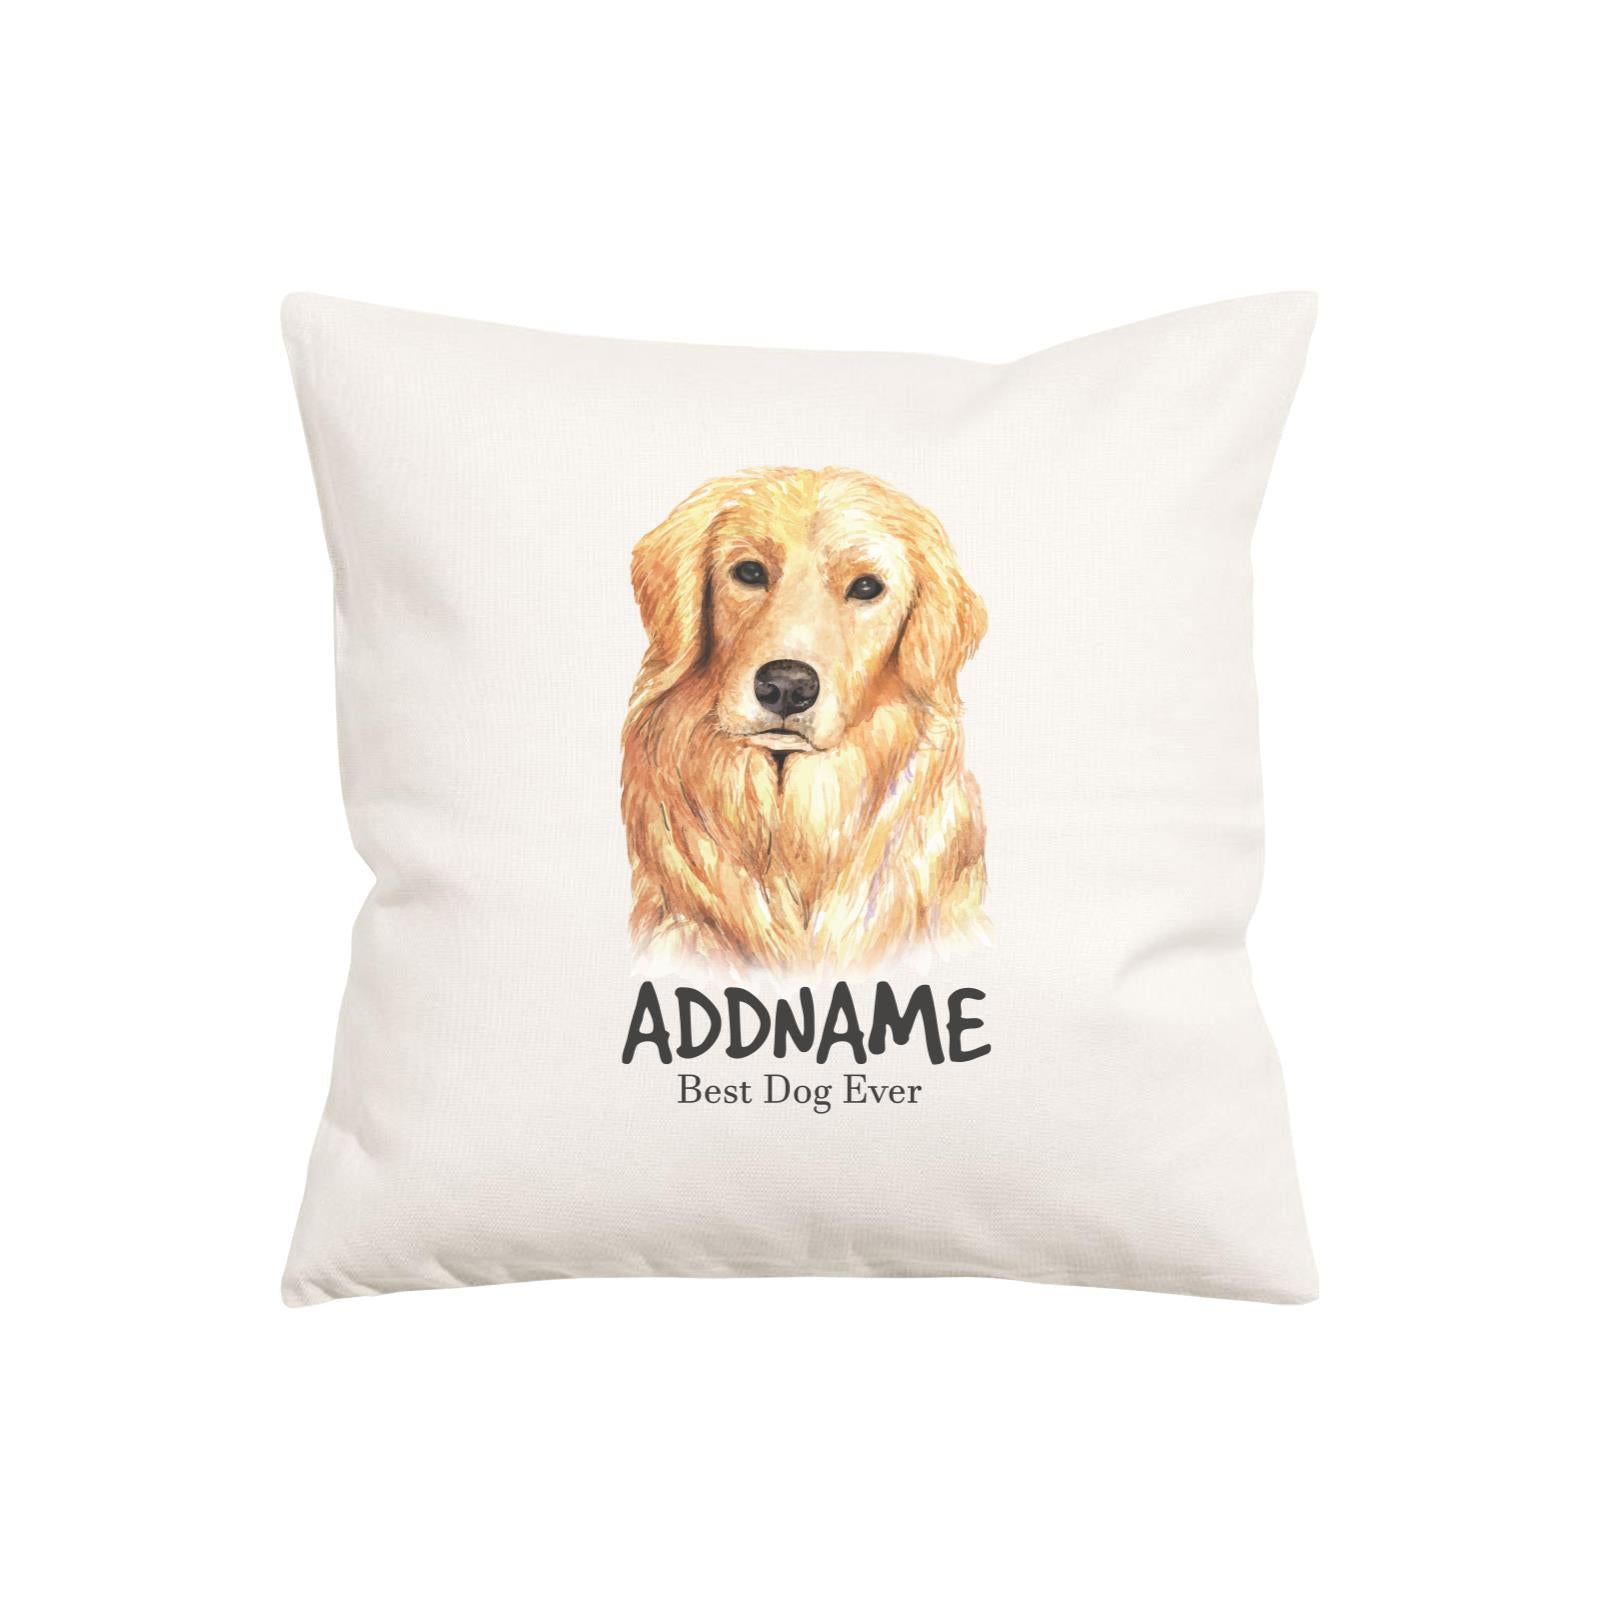 Watercolor Dog Series Golden Retriever Best Dog Ever Addname Pillow Cushion